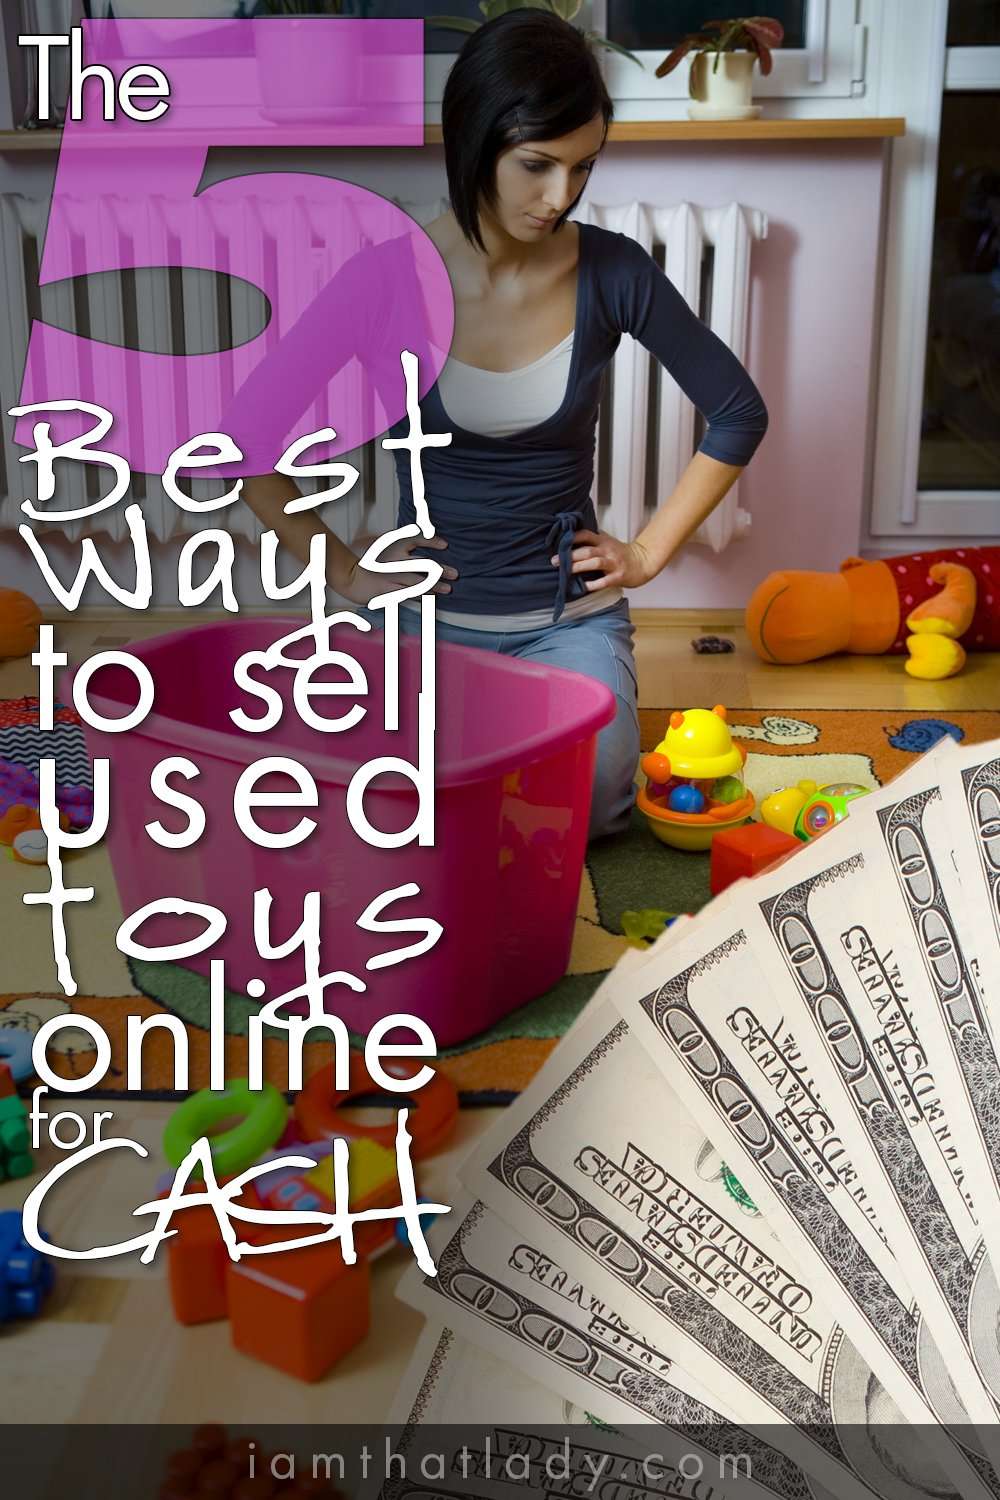 The 5 Best Ways to sell used toys online for CASH